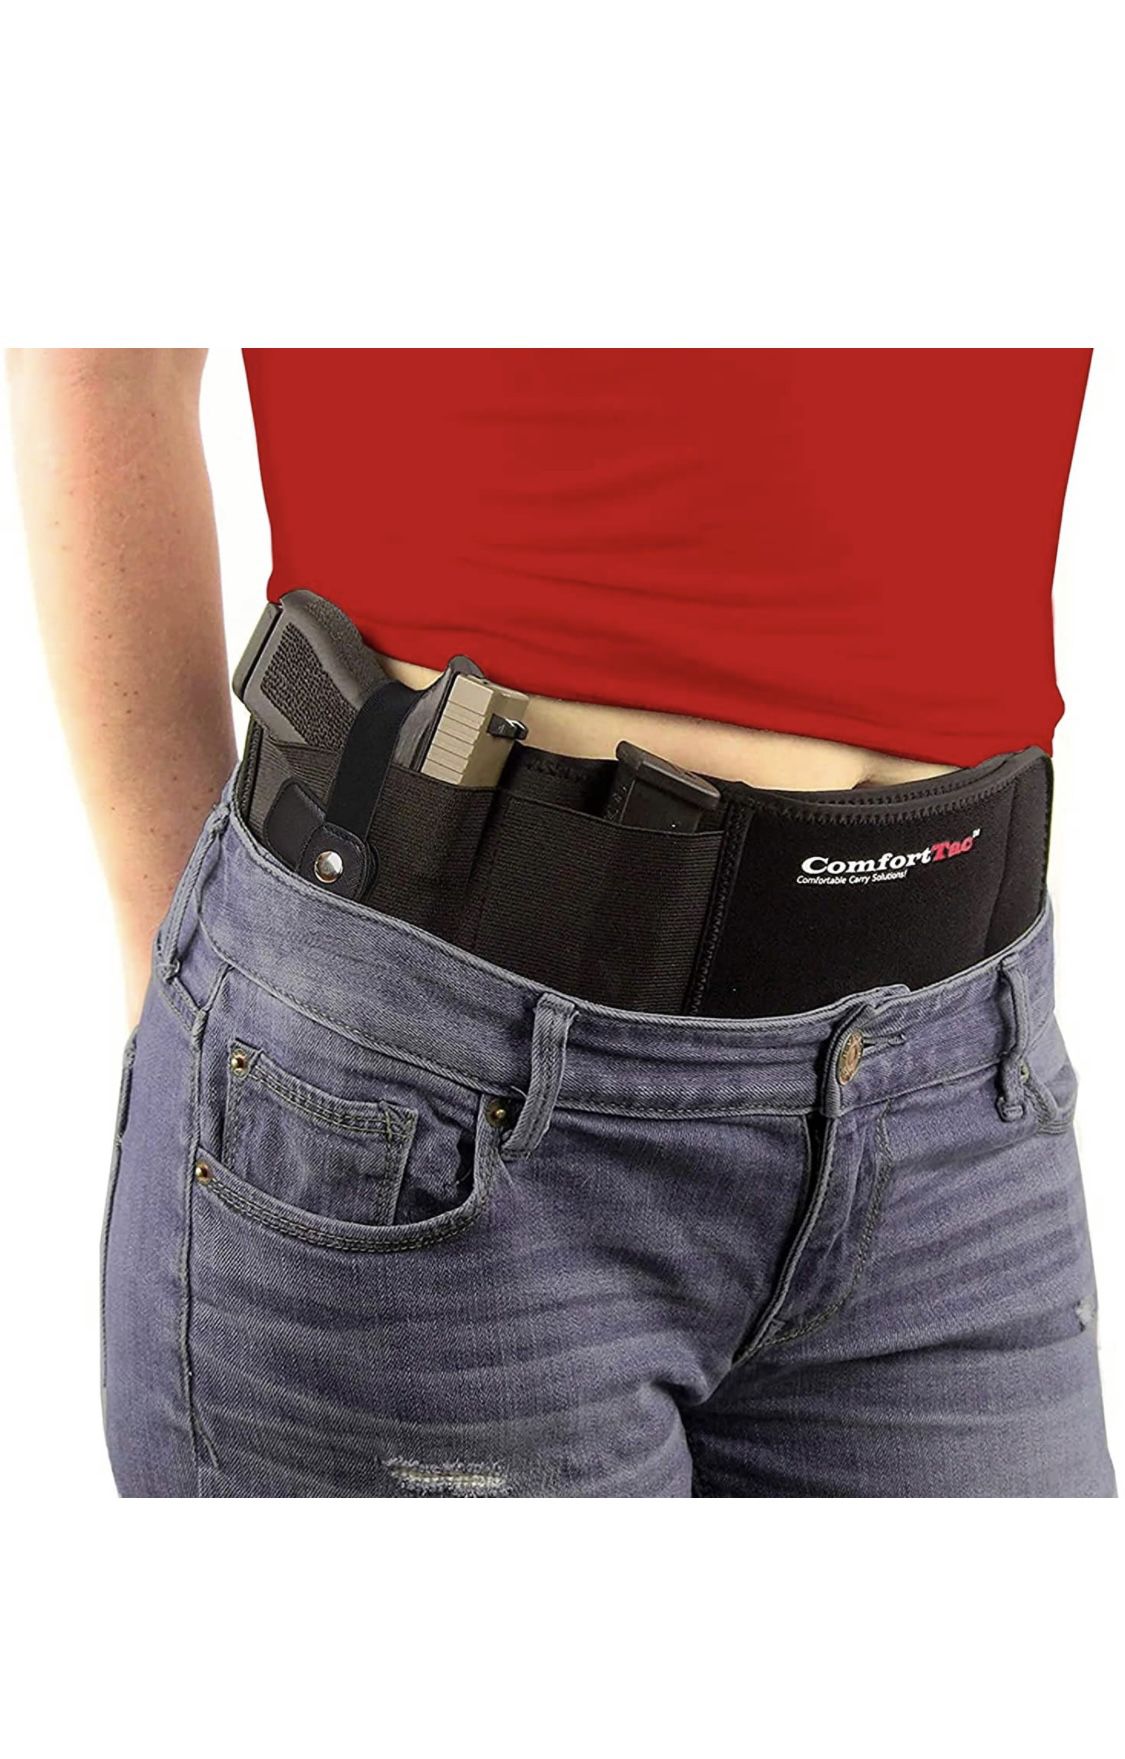 ComfortTac Ultimate Belly Band Gun Holster for Concealed Carry | Compatible with Smith and Wesson, Shield, Glock 19, 17, 42, 43, P238, Ruger LCP, and 